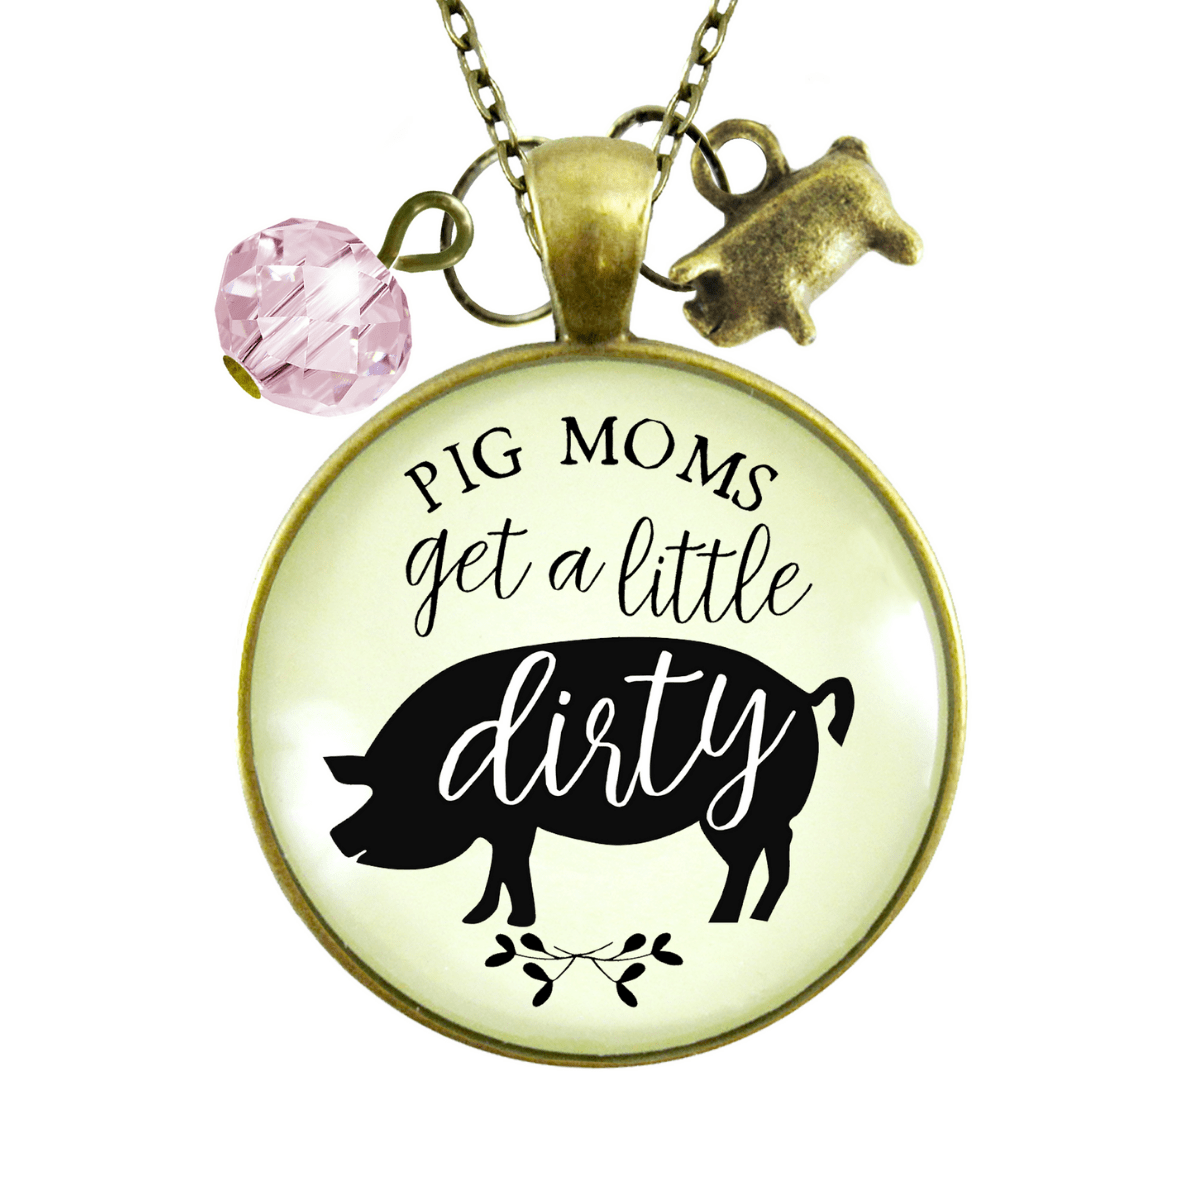 Gutsy Goodness Pig Necklace Quote Pig Moms Get Dirty Sassy Country Girl Jewelry - Gutsy Goodness;Pig Necklace Quote Pig Moms Get Dirty Sassy Country Girl Jewelry - Gutsy Goodness Handmade Jewelry Gifts